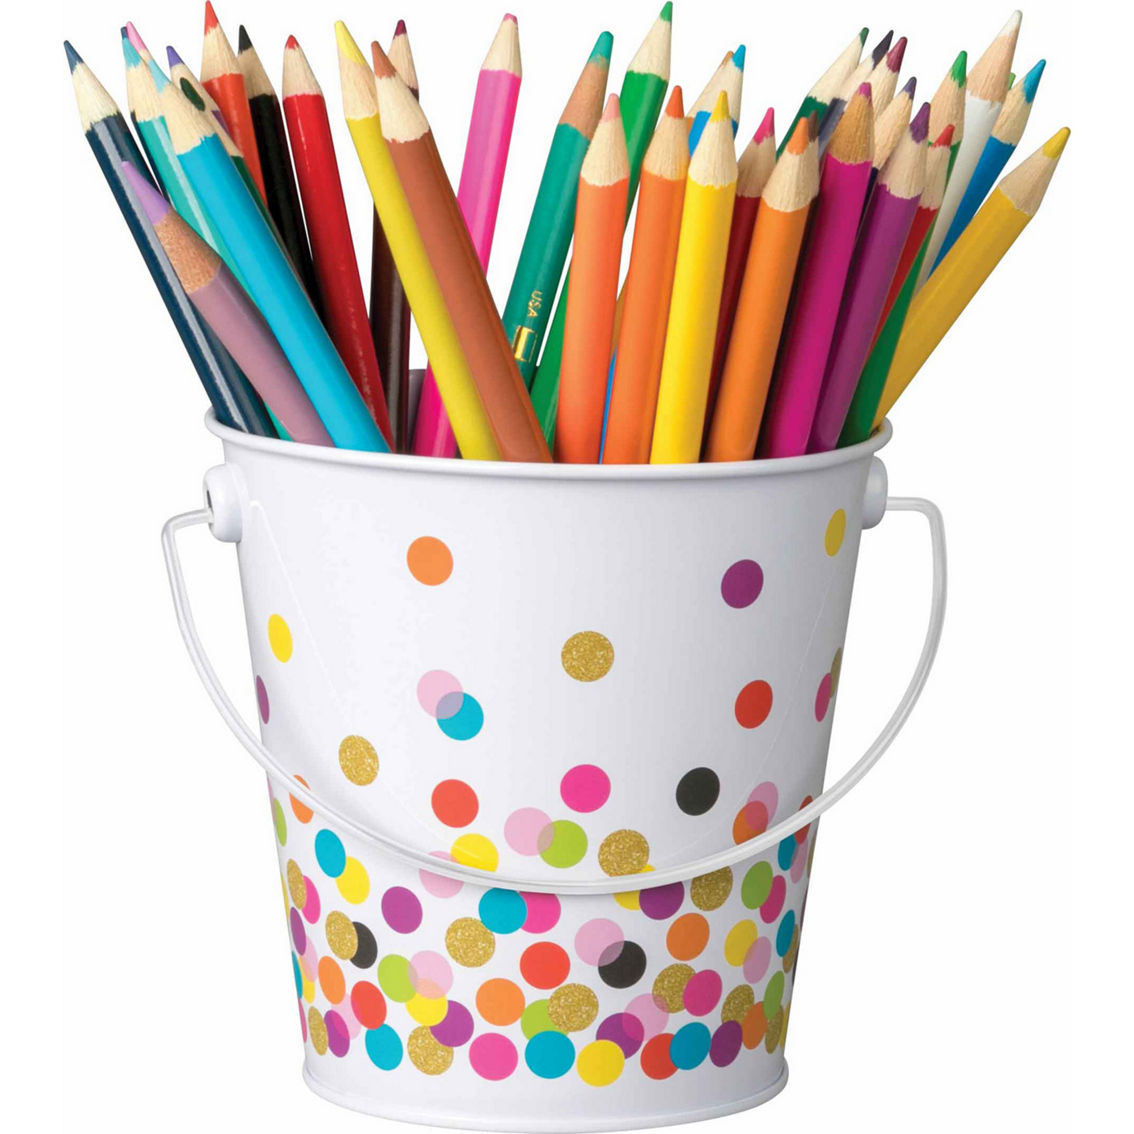 Teacher Created Resources® Confetti Bucket, Pack of 6 - Image 2 of 2